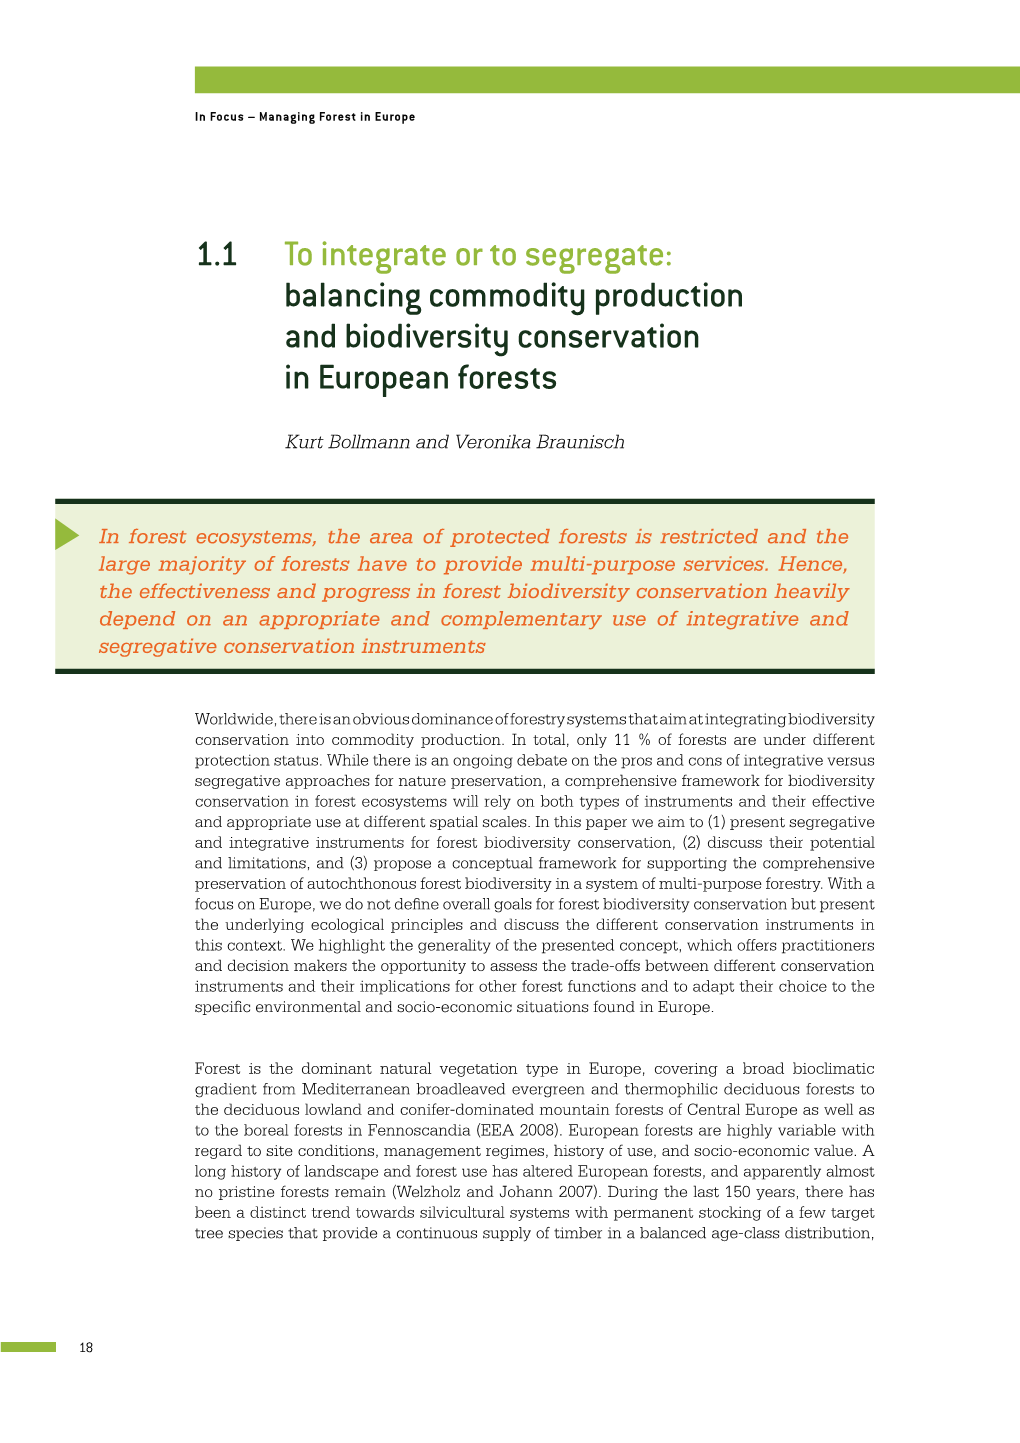 1.1 to Integrate Or to Segregate: Balancing Commodity Production and Biodiversity Conservation in European Forests